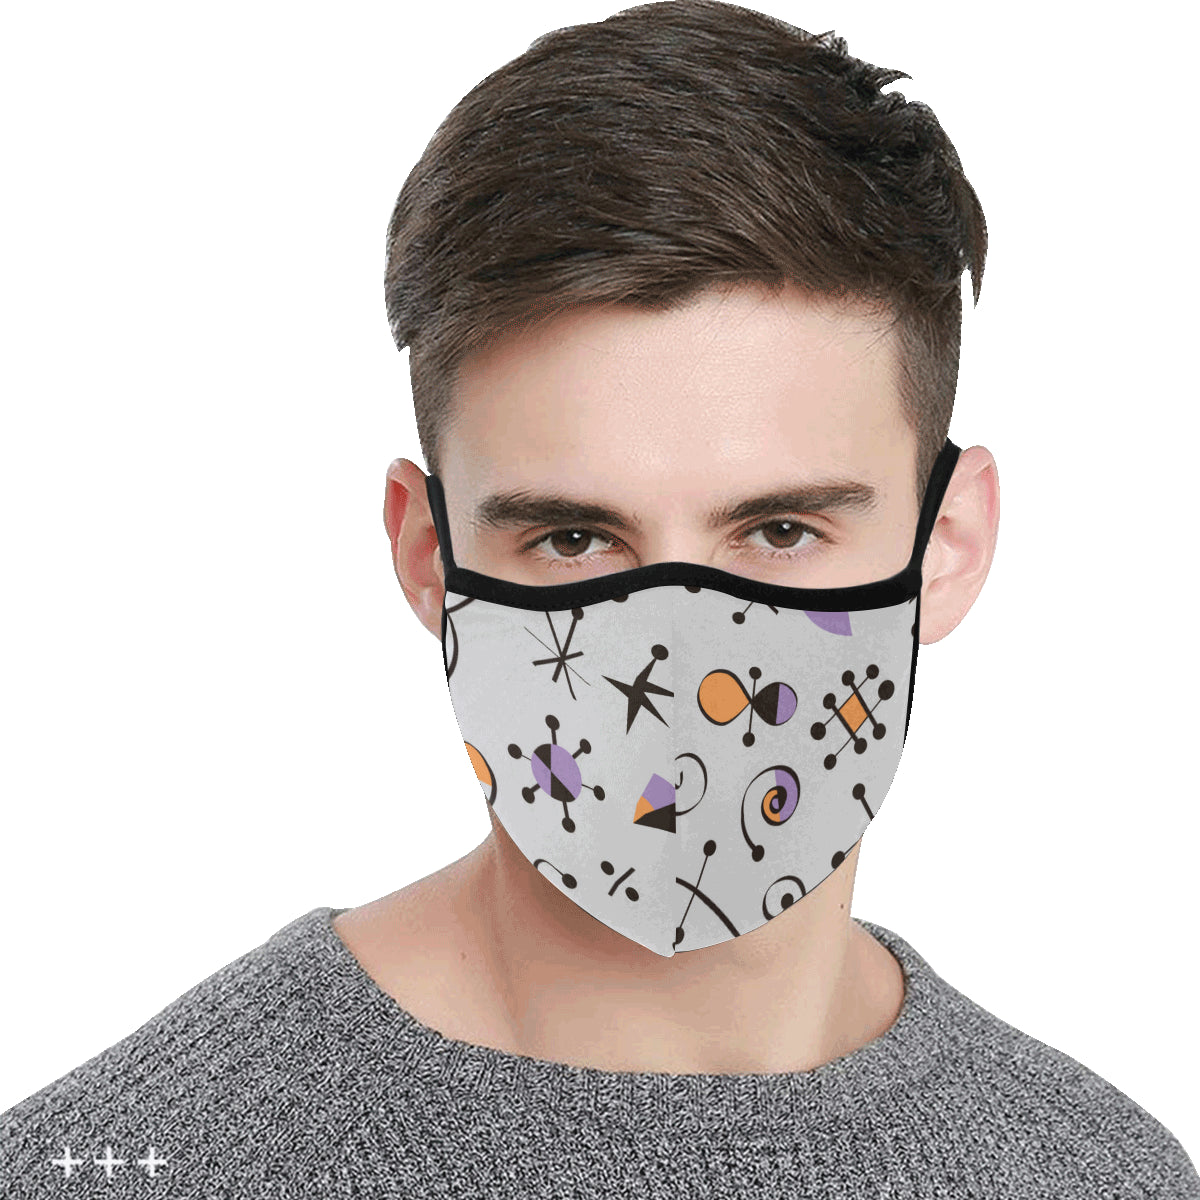 Geometric Cotton Fabric Face Mask with filter slot (30 Filters Included) - Non-medical use